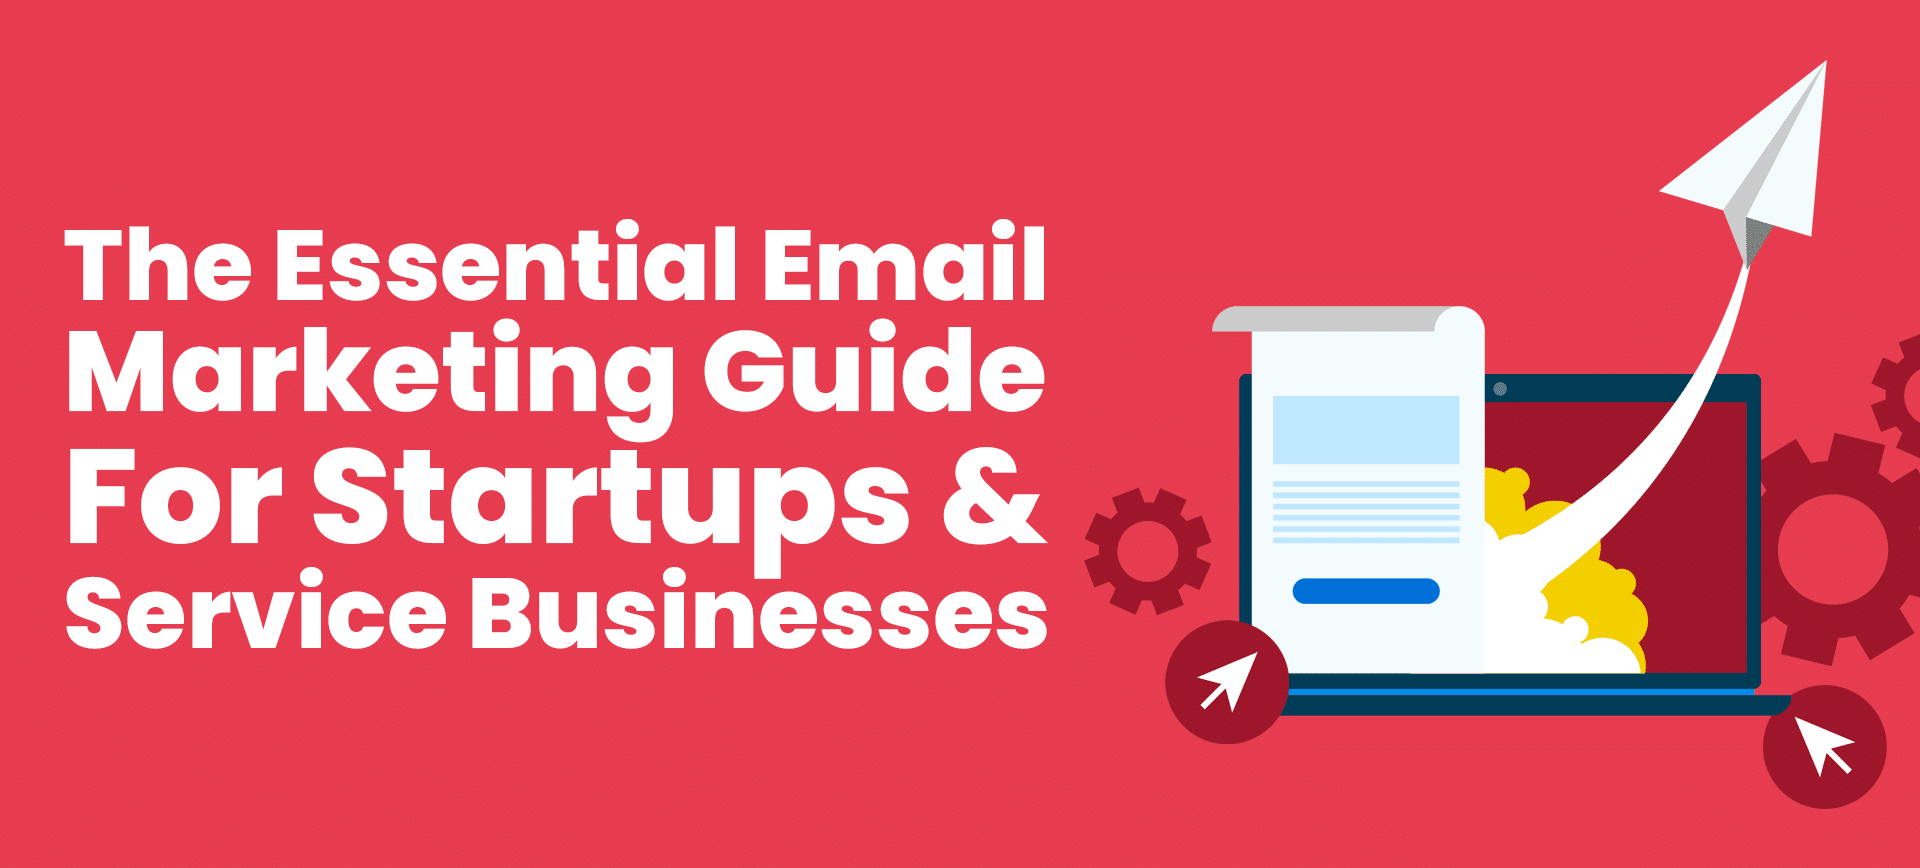 The Essential Email Marketing Guide For Startups & Service Businesses